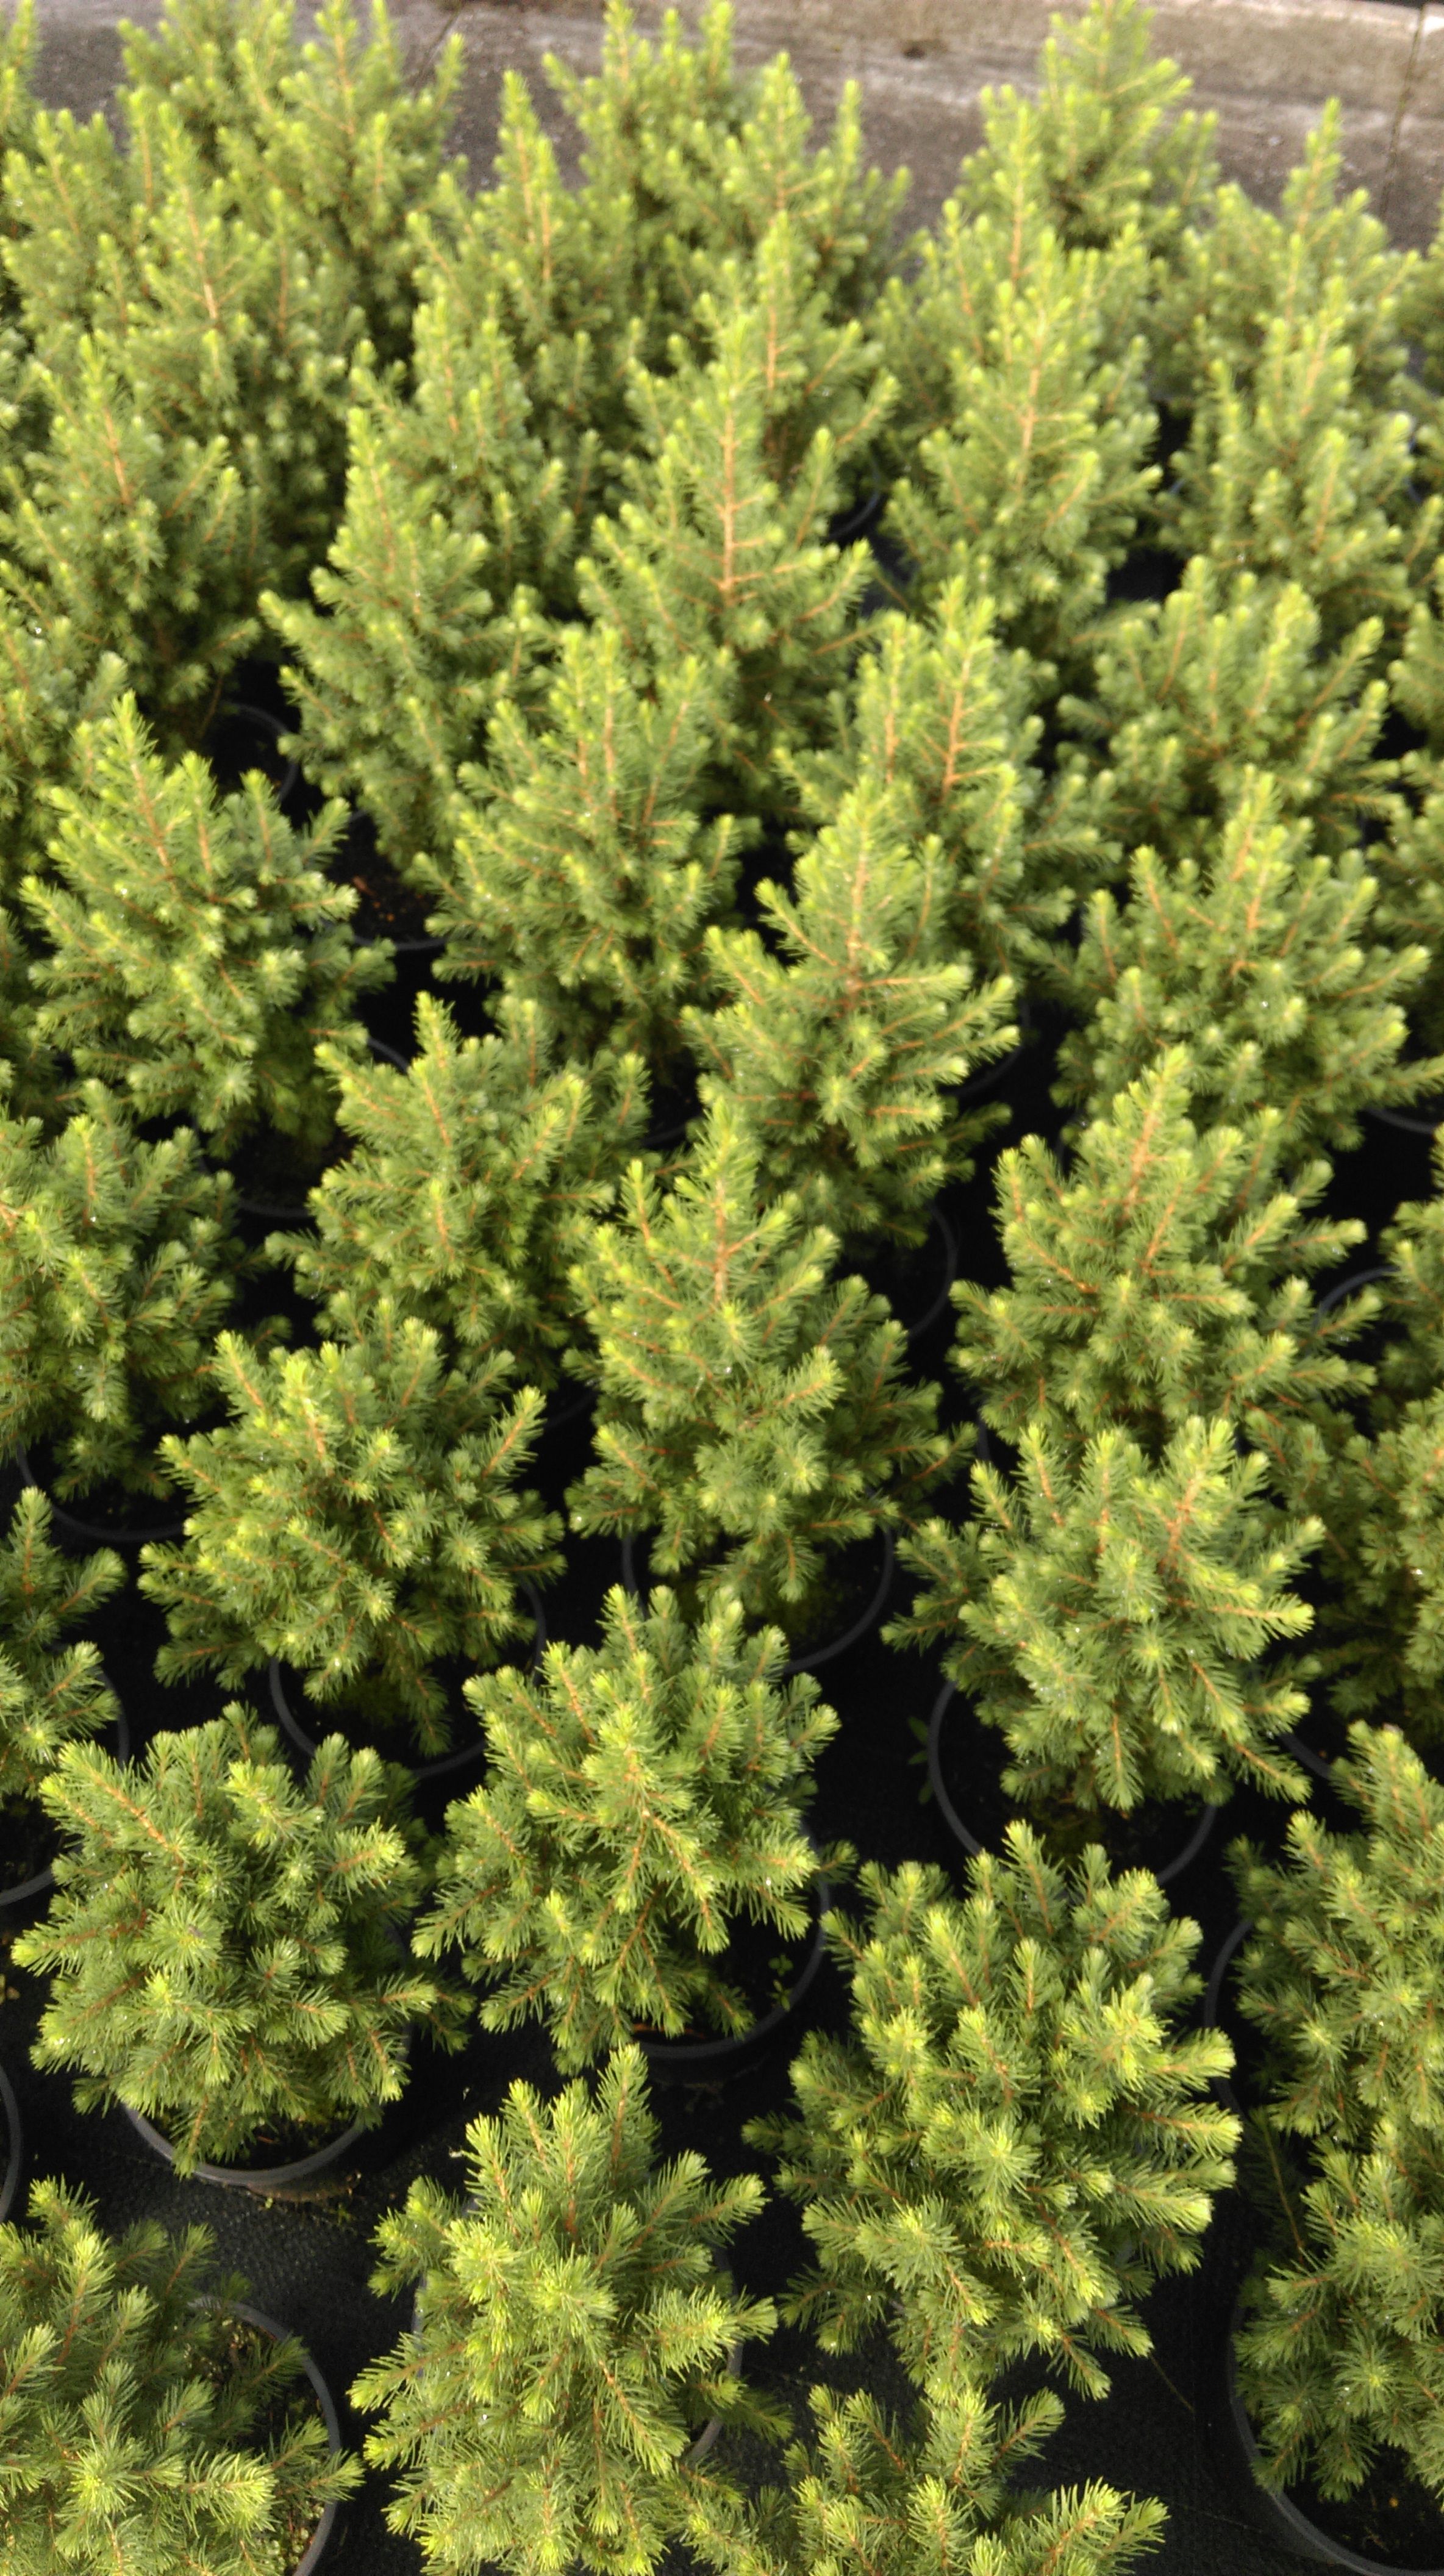 images/plants/picea/pic-spruce-it-up/pic-spruce-it-up-0011.jpg